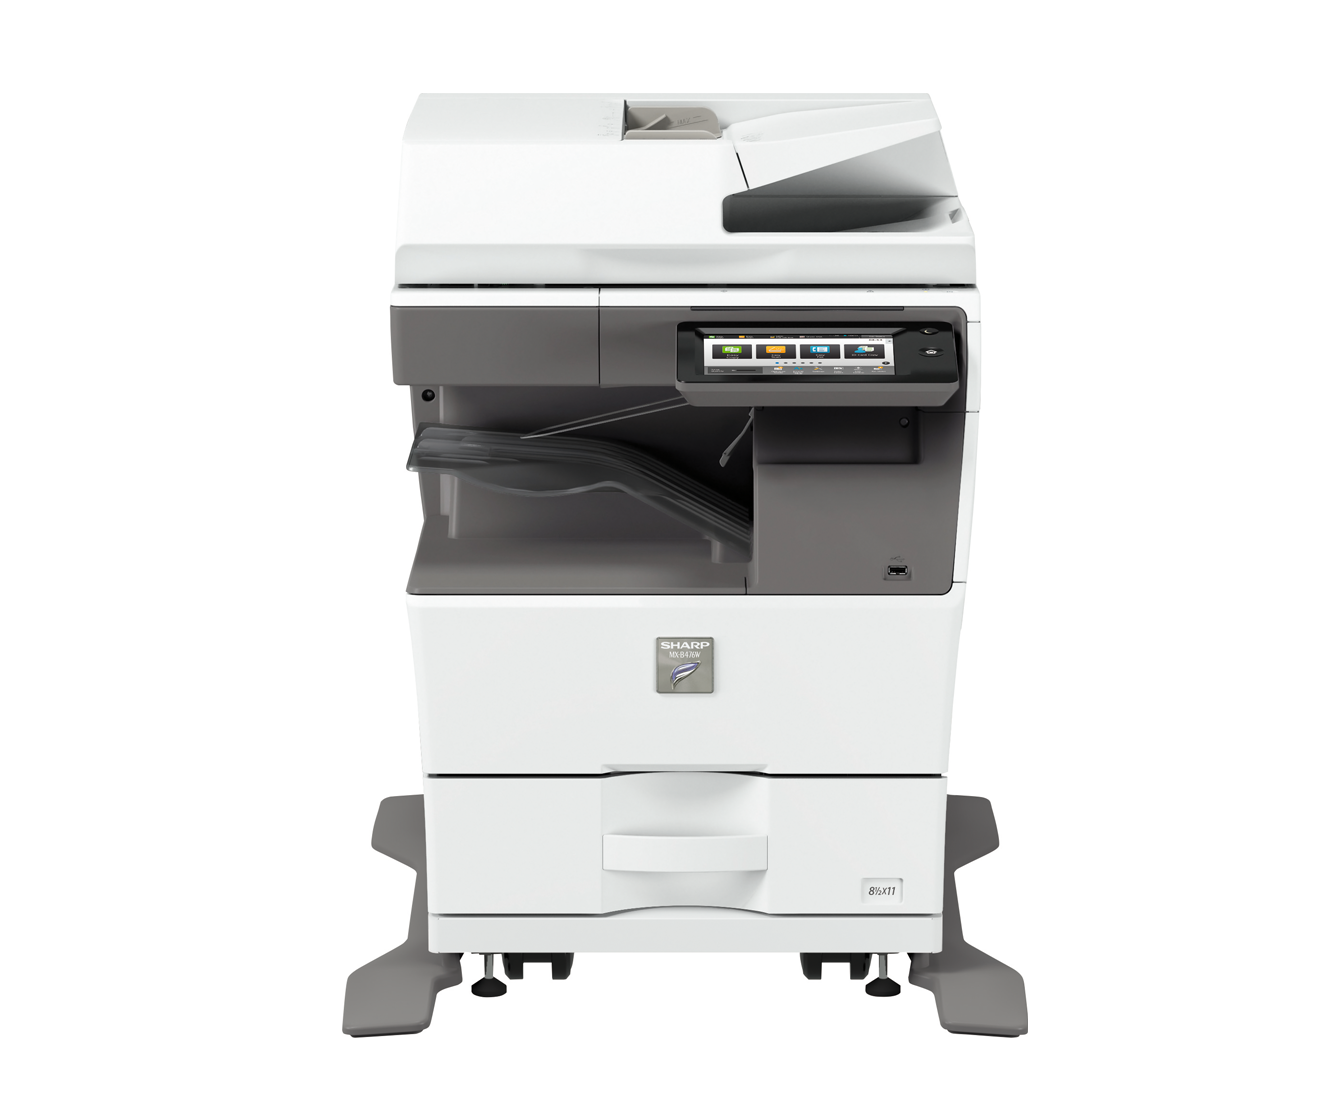 Sharp MXB376W Black And White Multifunctional Printer With Standard Copy, Print, Scan, Fax For Office Use